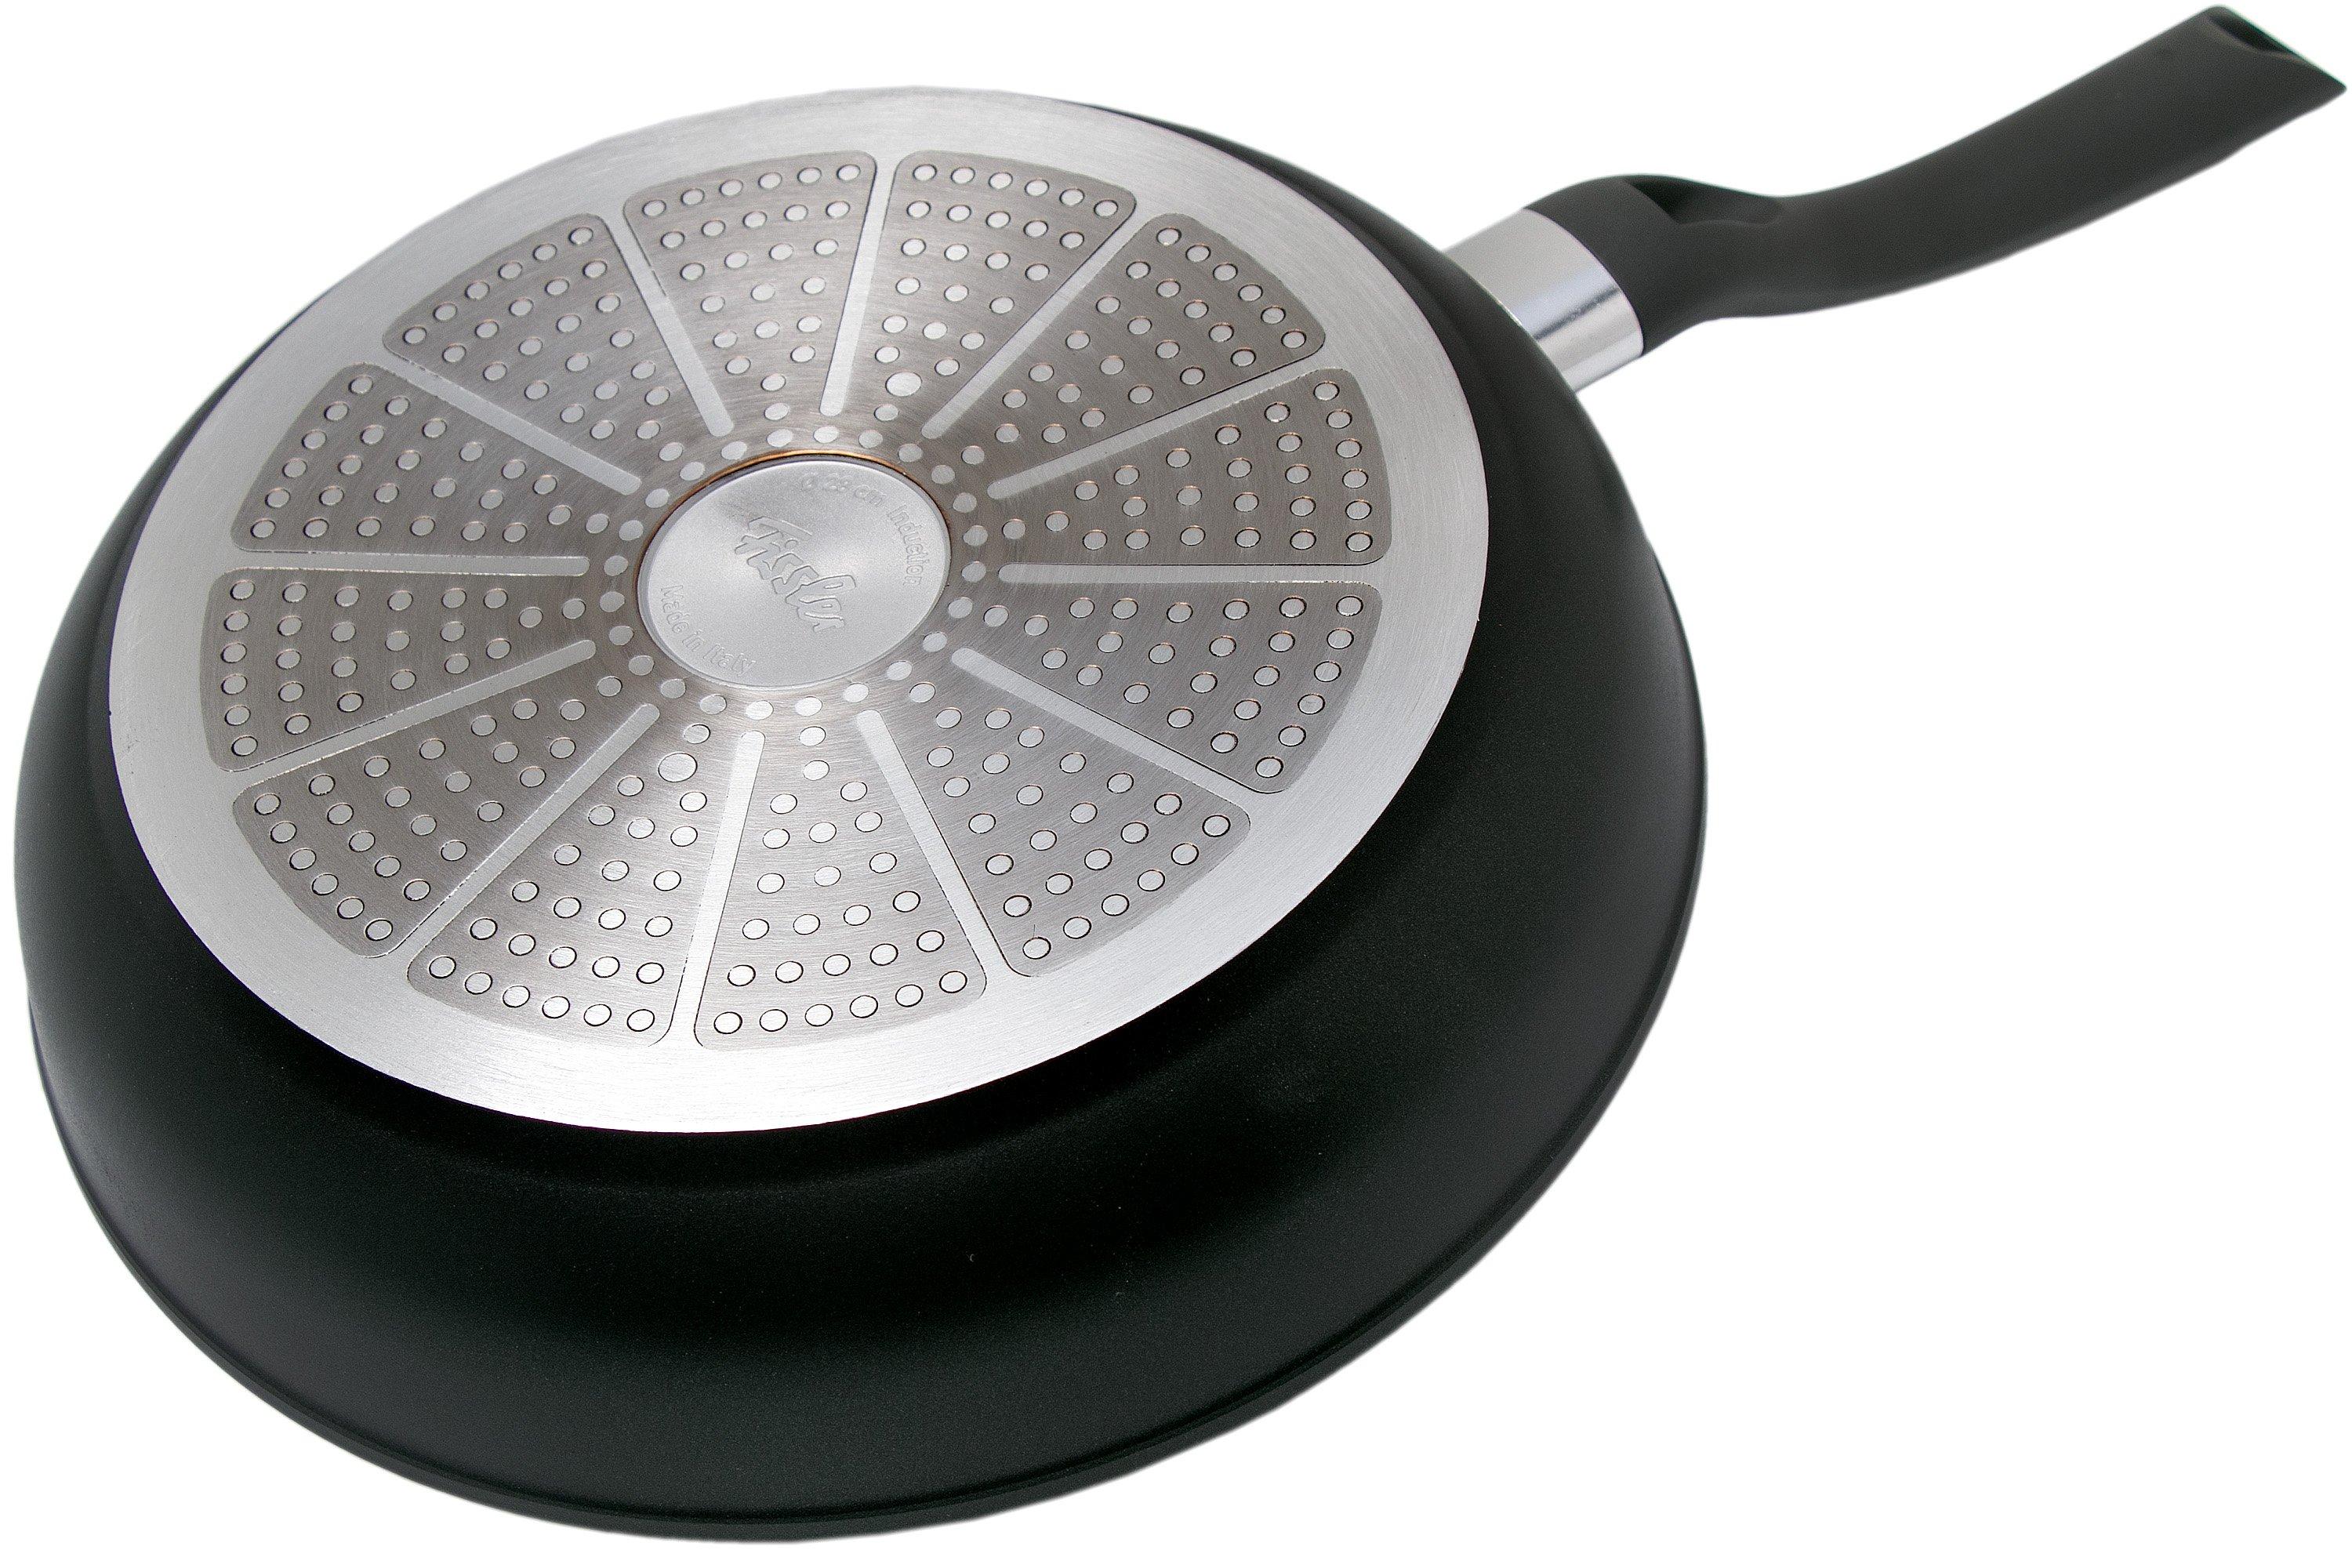 frying 045-301-28-100, Fissler pan shopping Induction | Cenit at cm 28 Advantageously